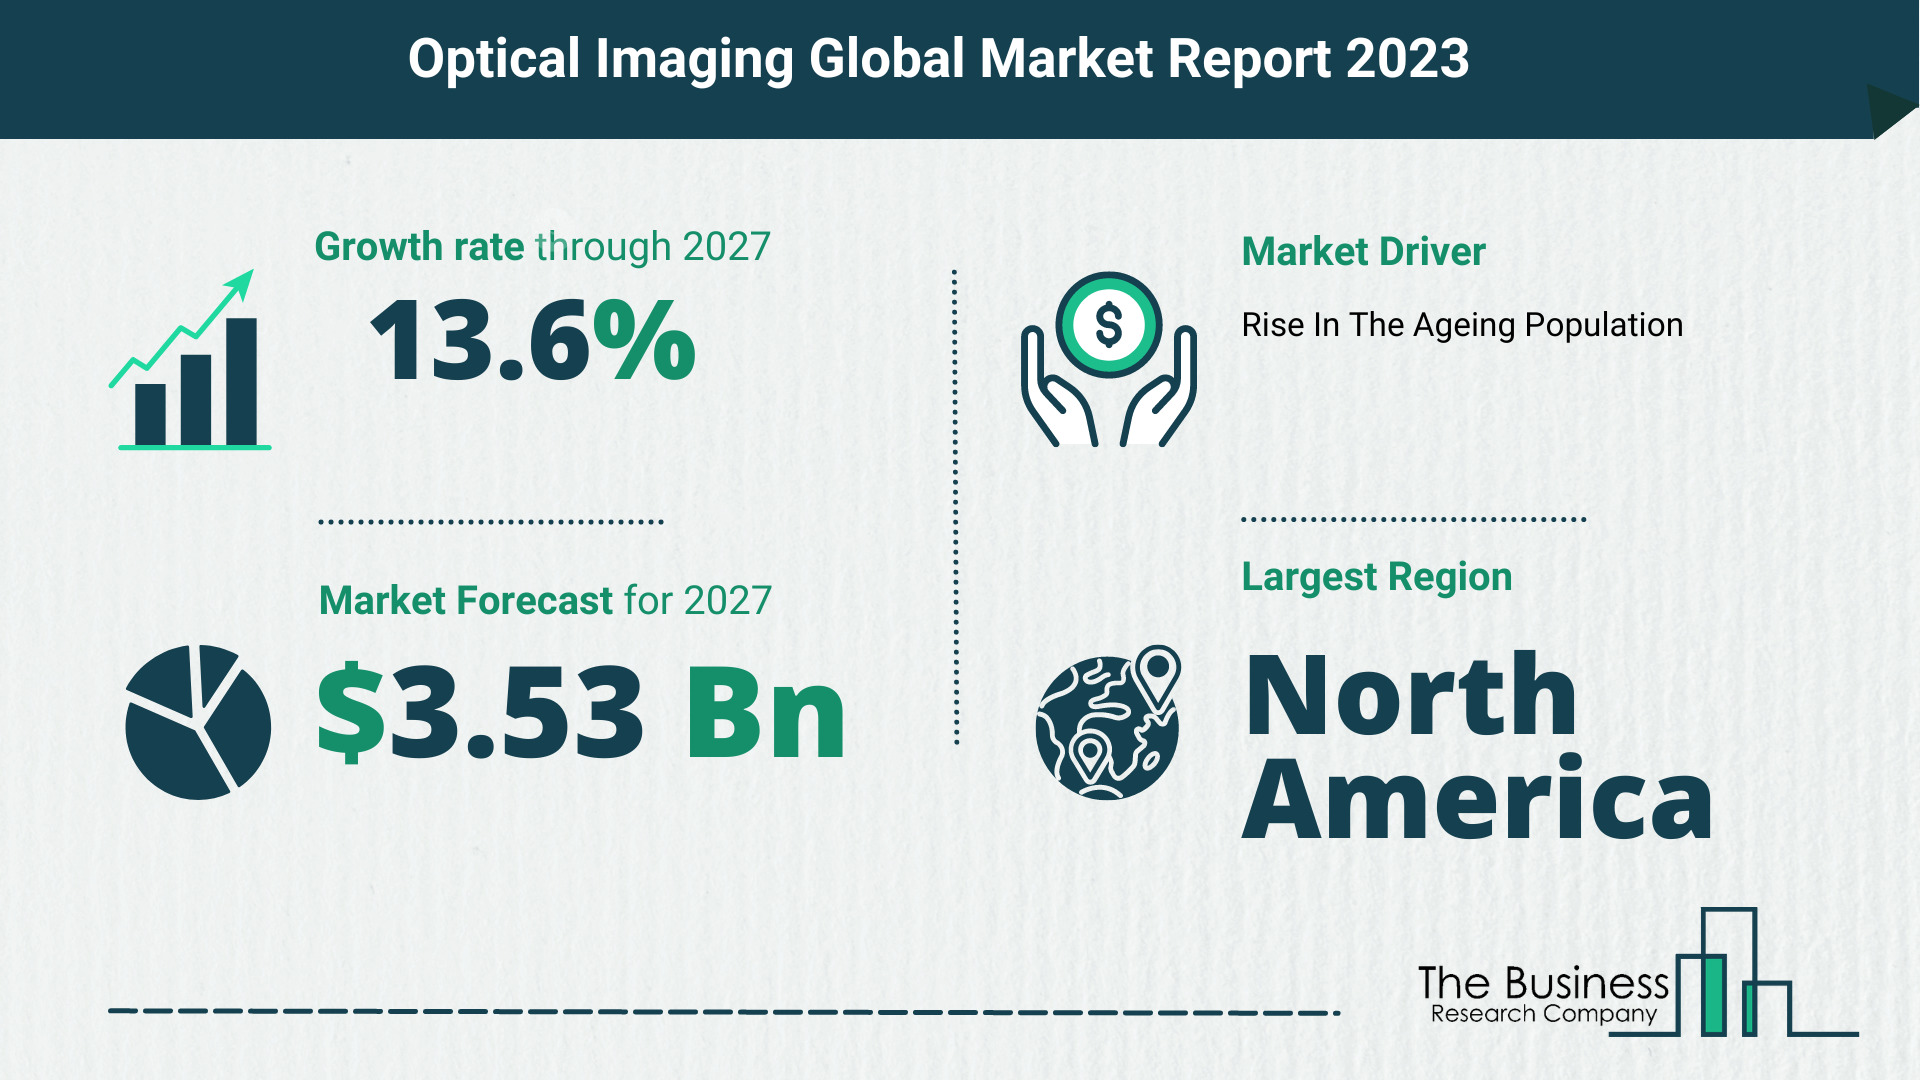 How Will The Optical Imaging Market Globally Expand In 2023?